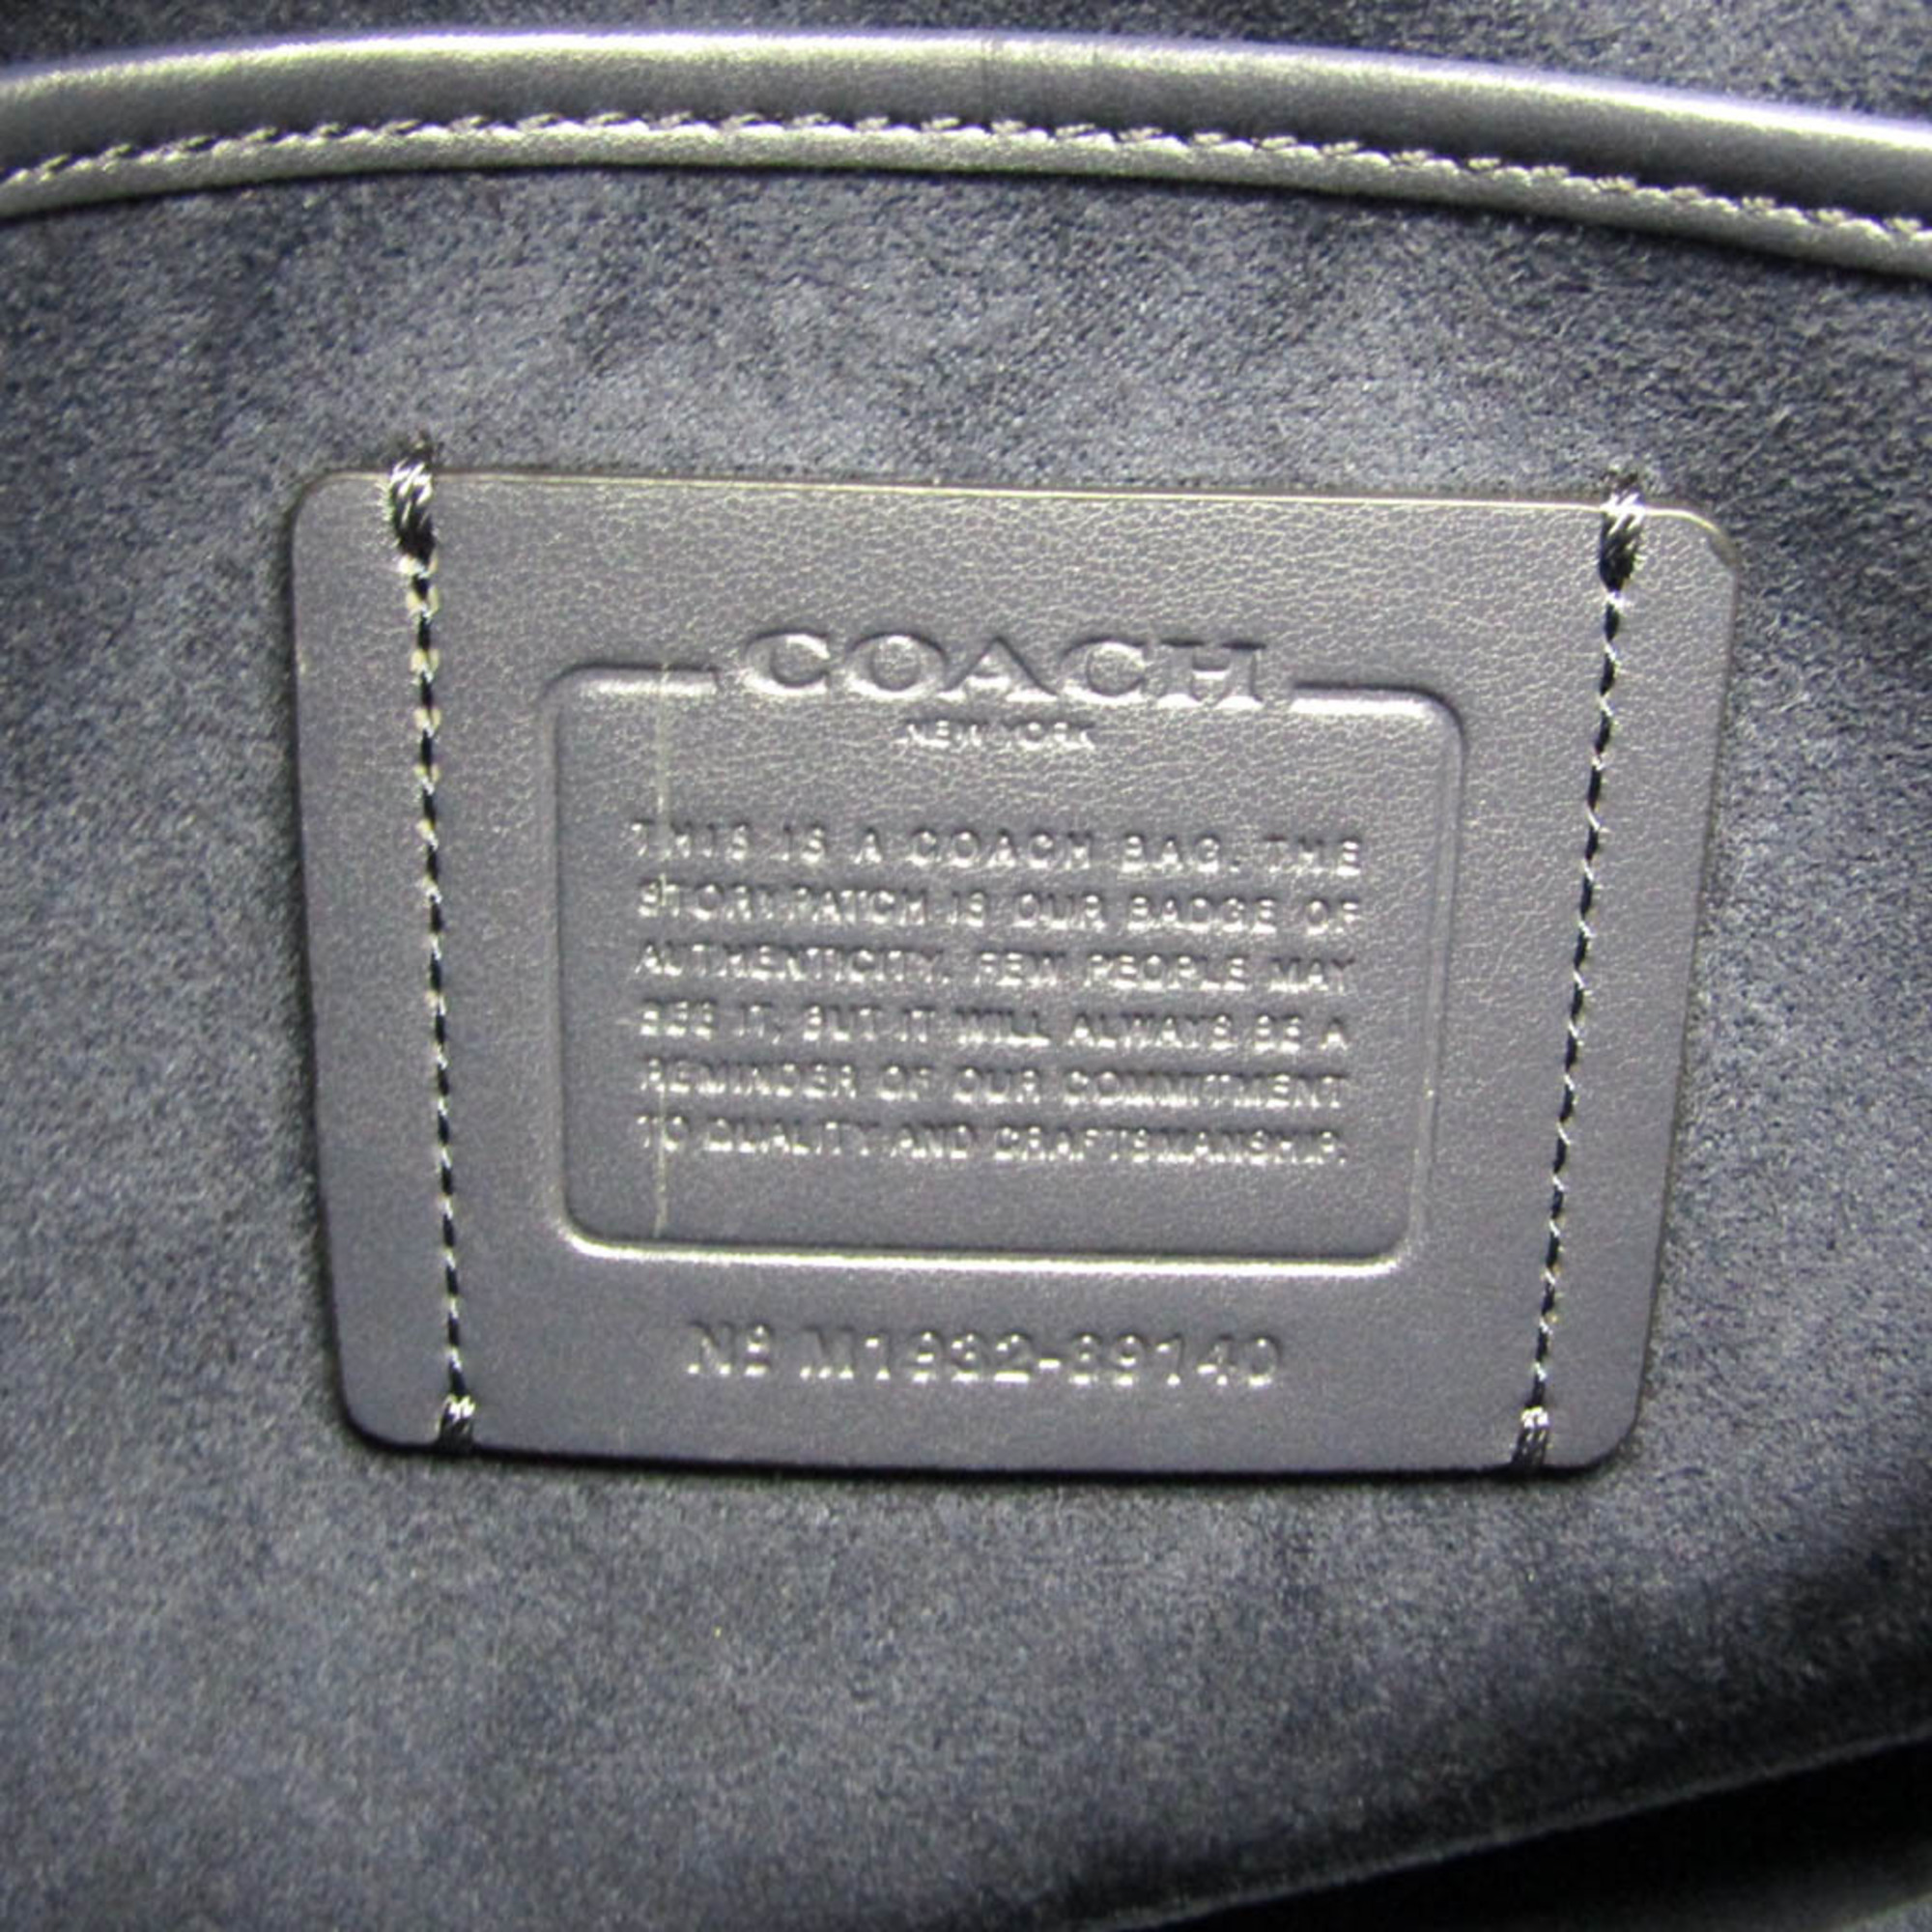 Coach Horse Carriage Emery 89140 Women's Leather,Coated Canvas Shoulder Bag Navy